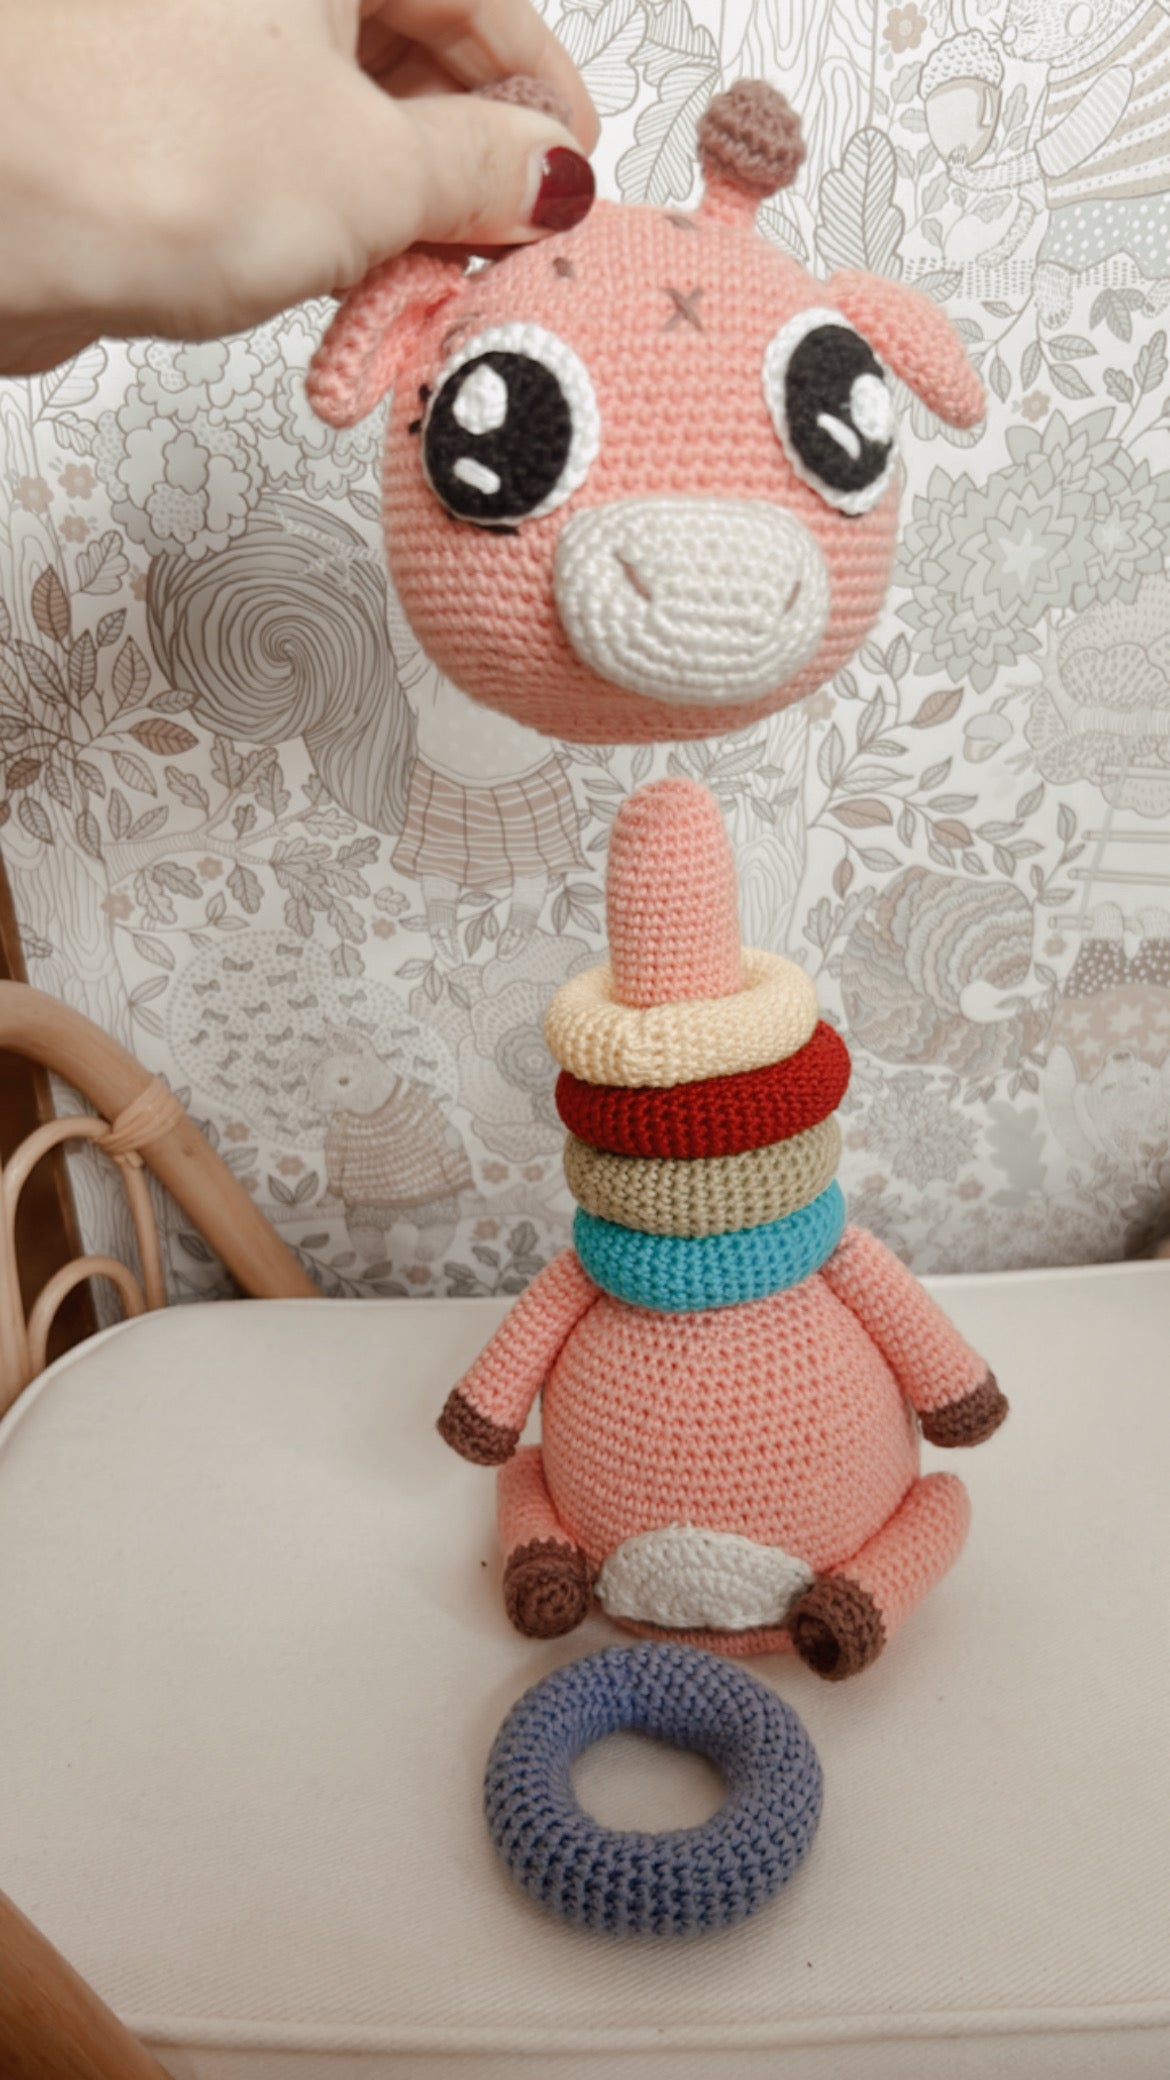 Gift for Baby, Crochet Giraffe Stacking Toys Baby, Montessori Toy for Babies